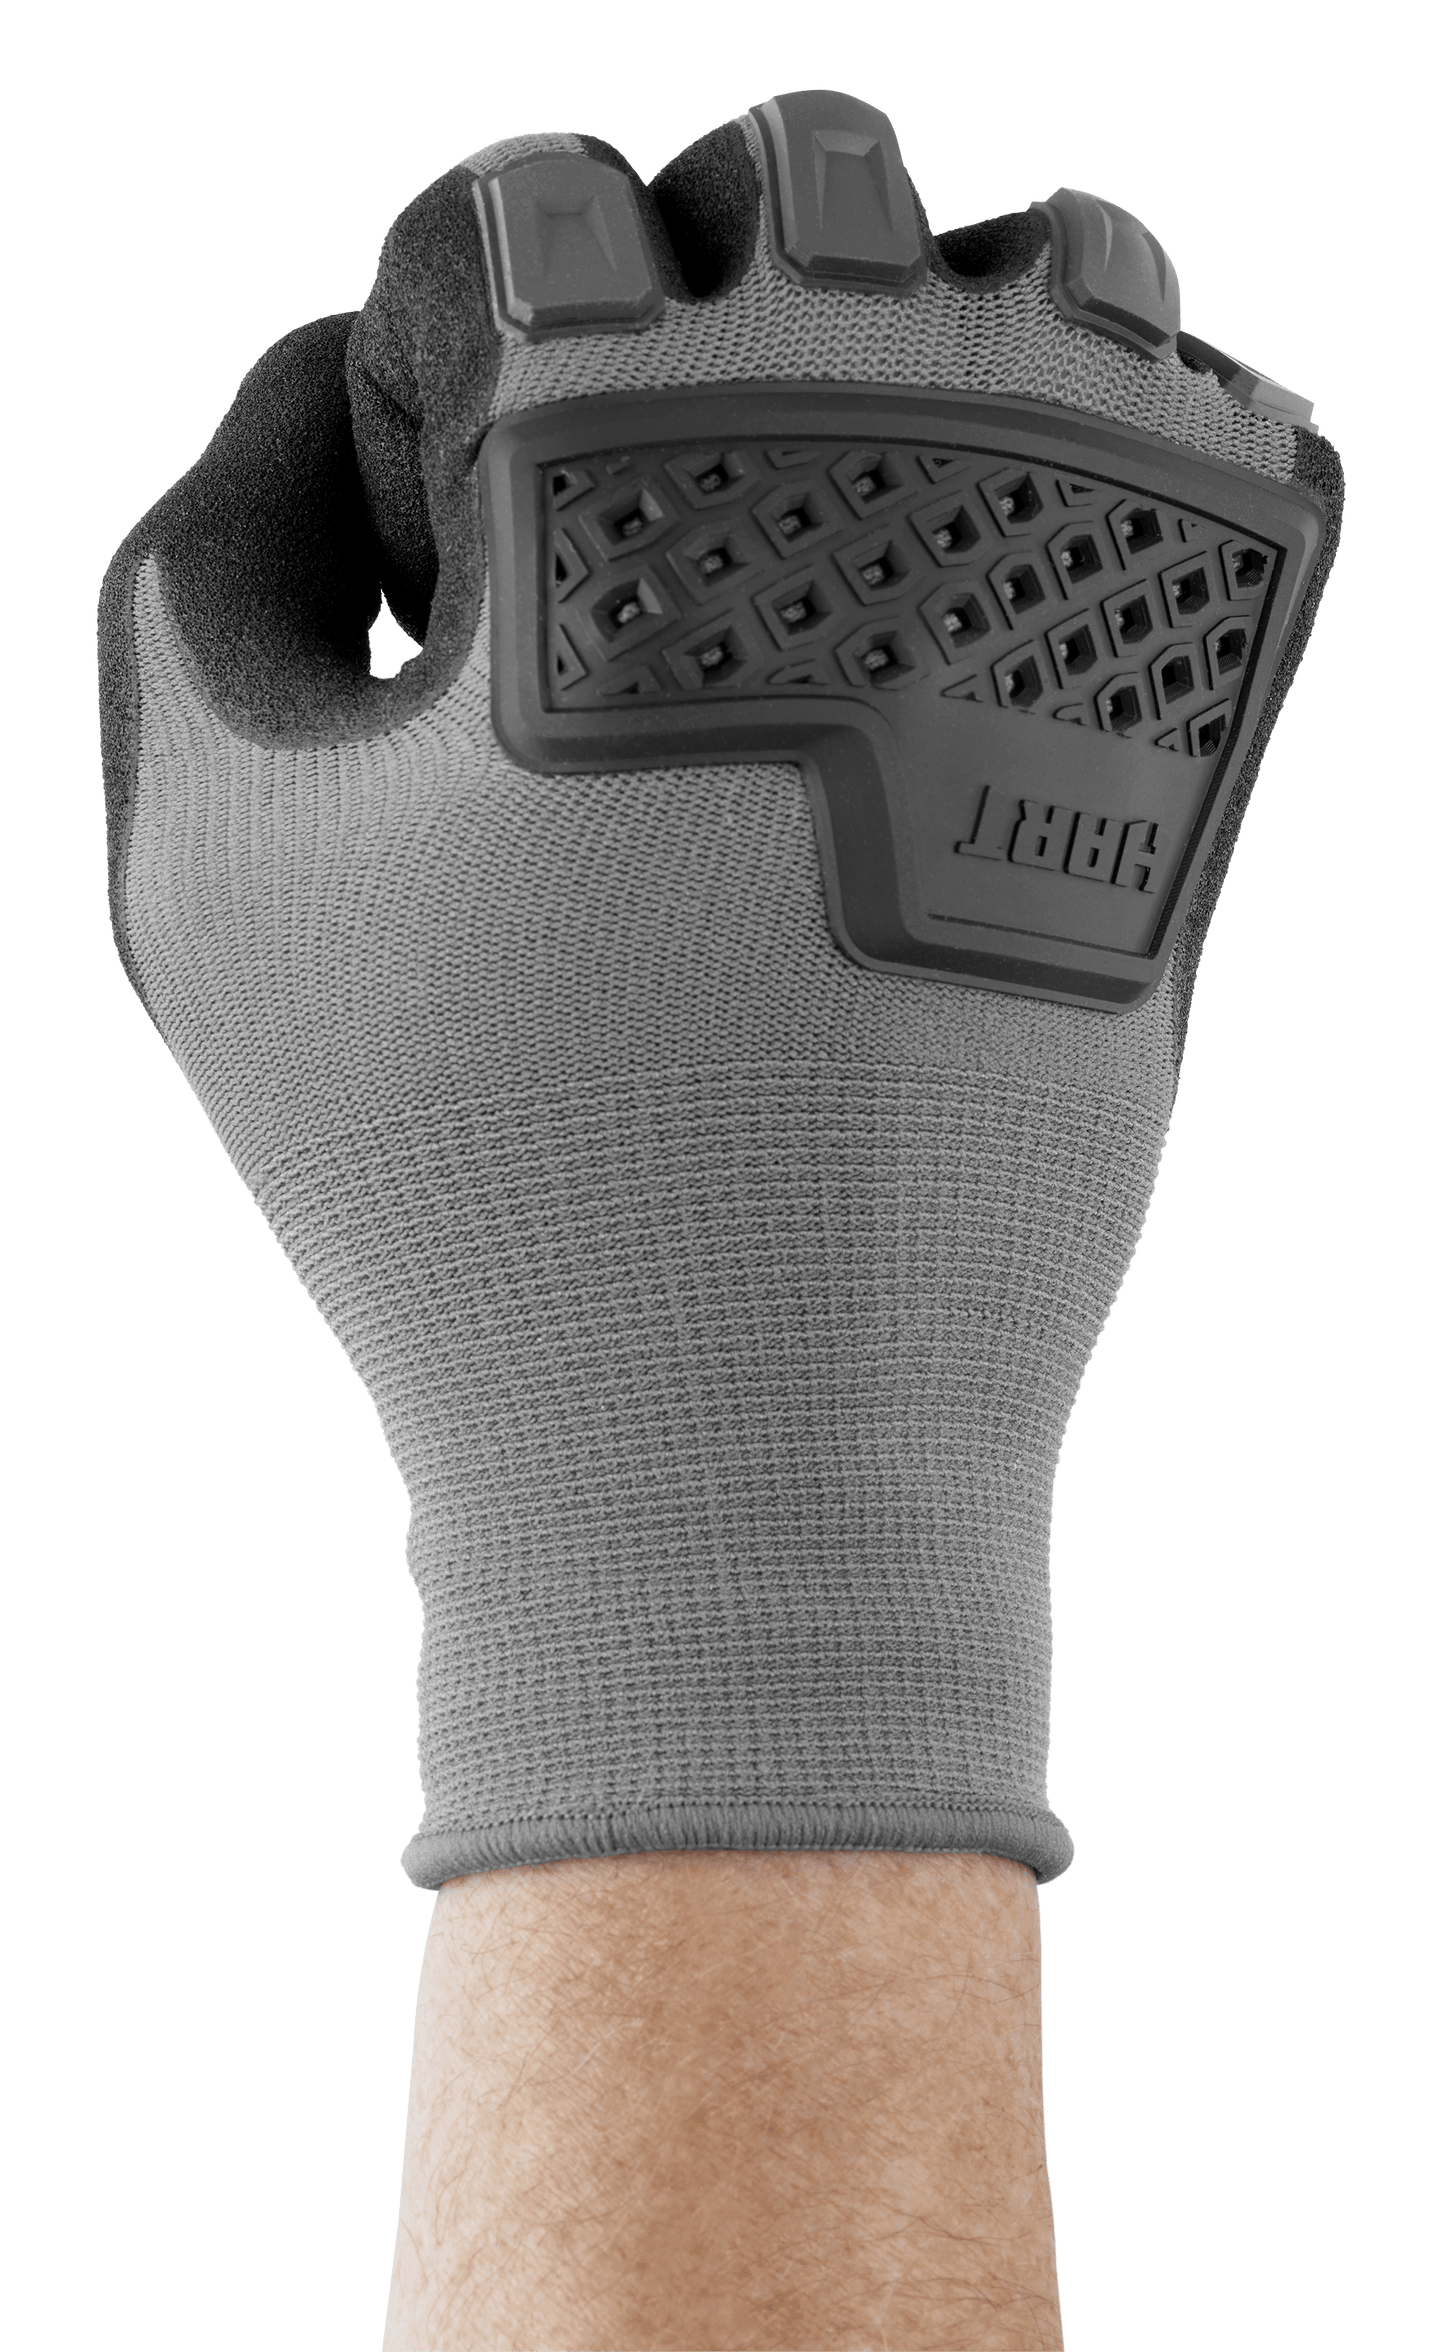 Dipped Impact Gloves - XL